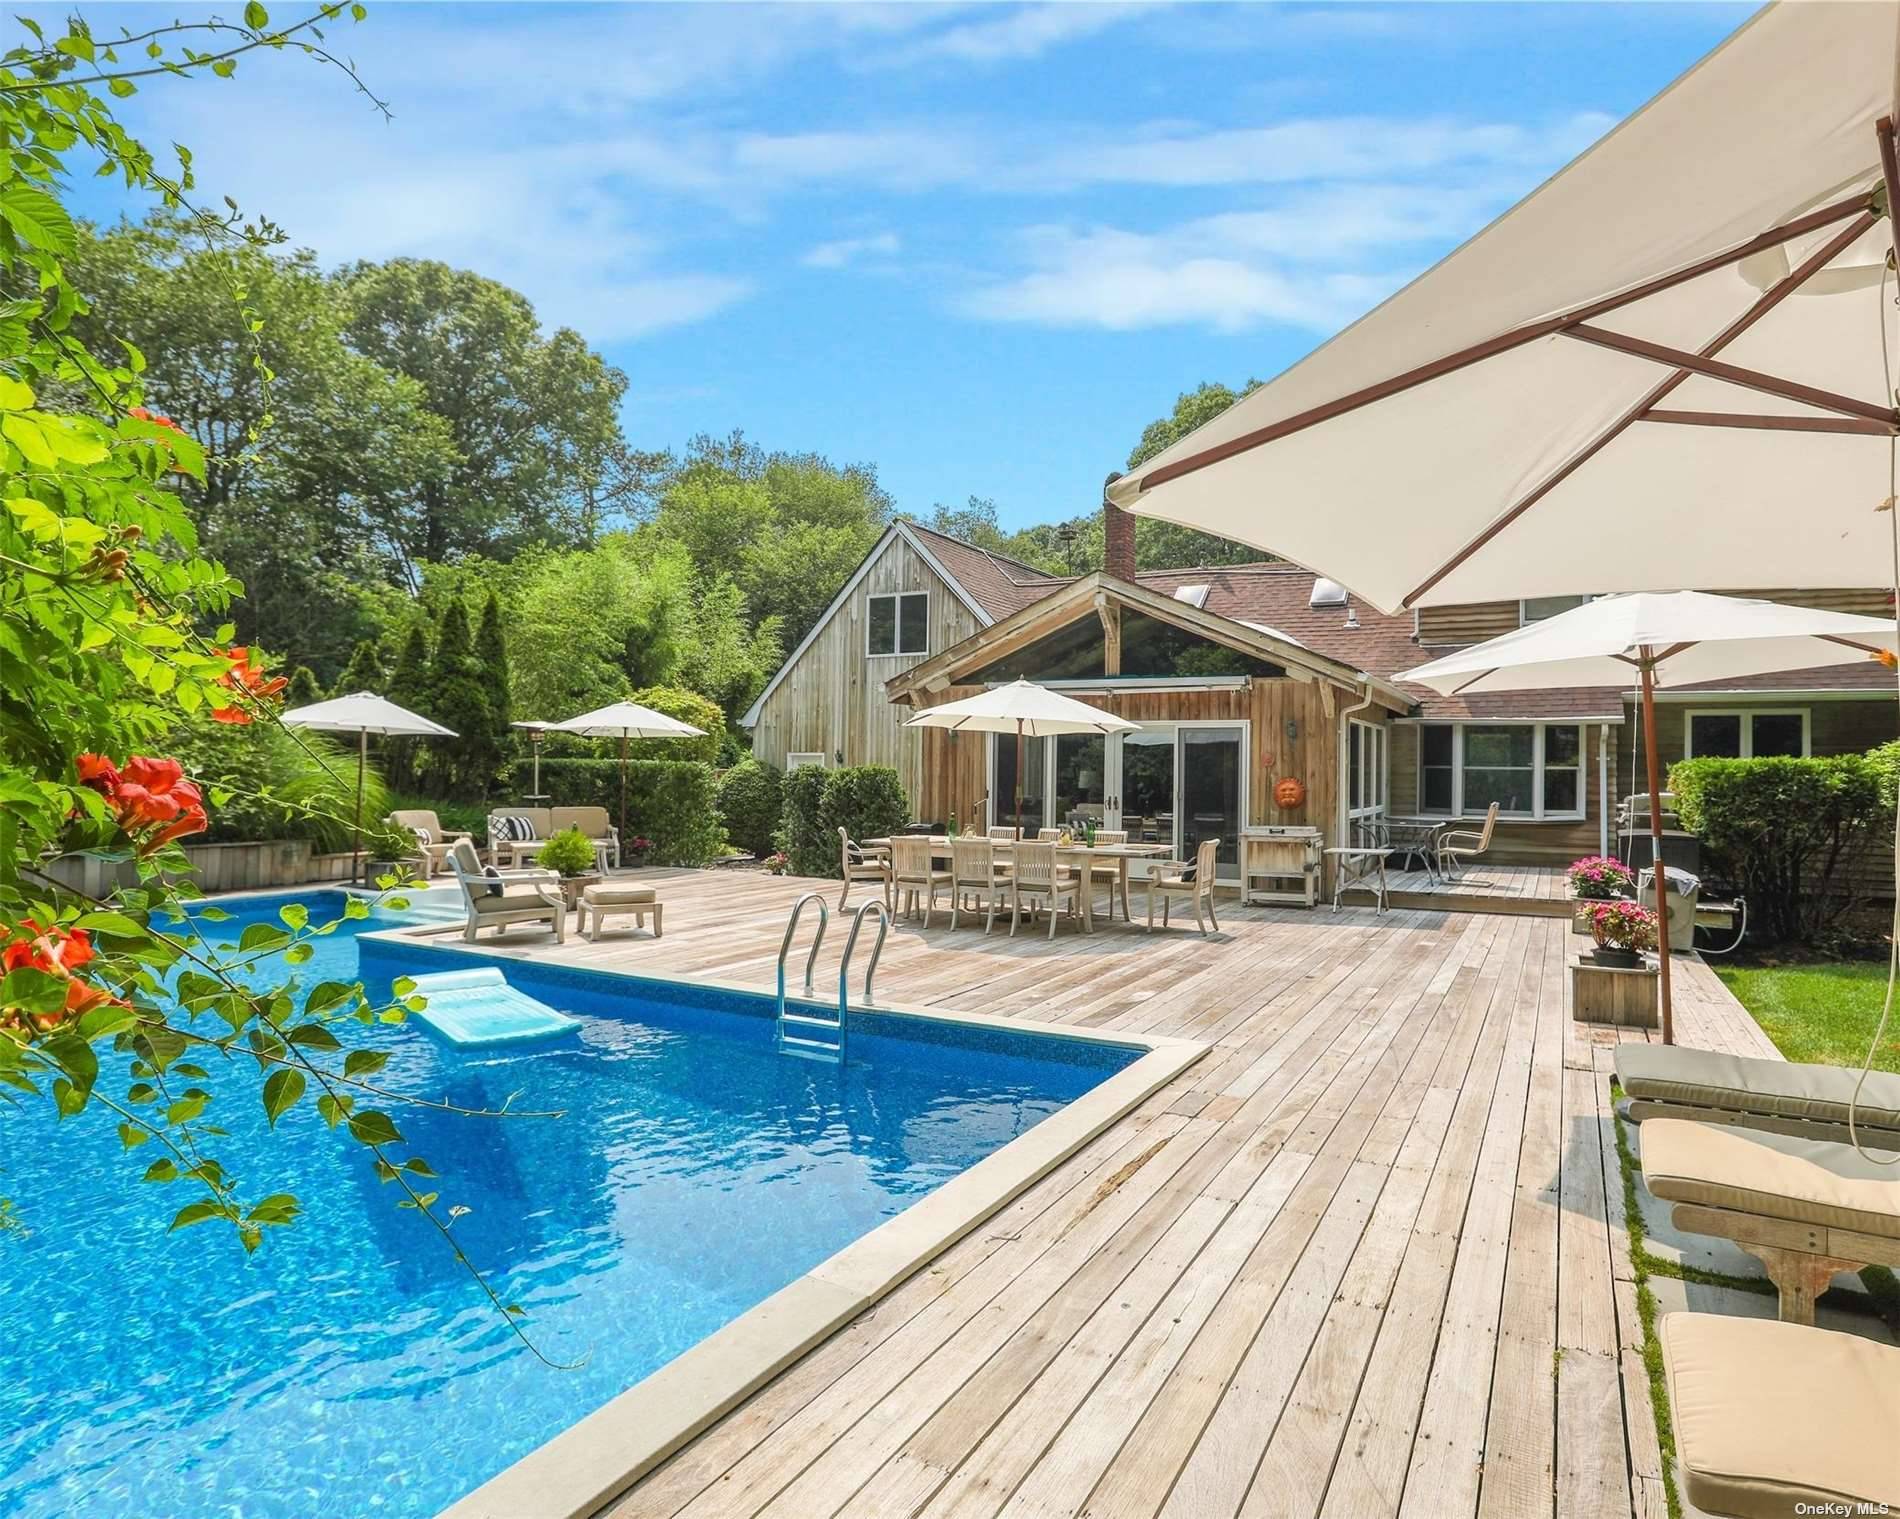 Escape to this lush, super private Oasis this summer and entertain like never before !